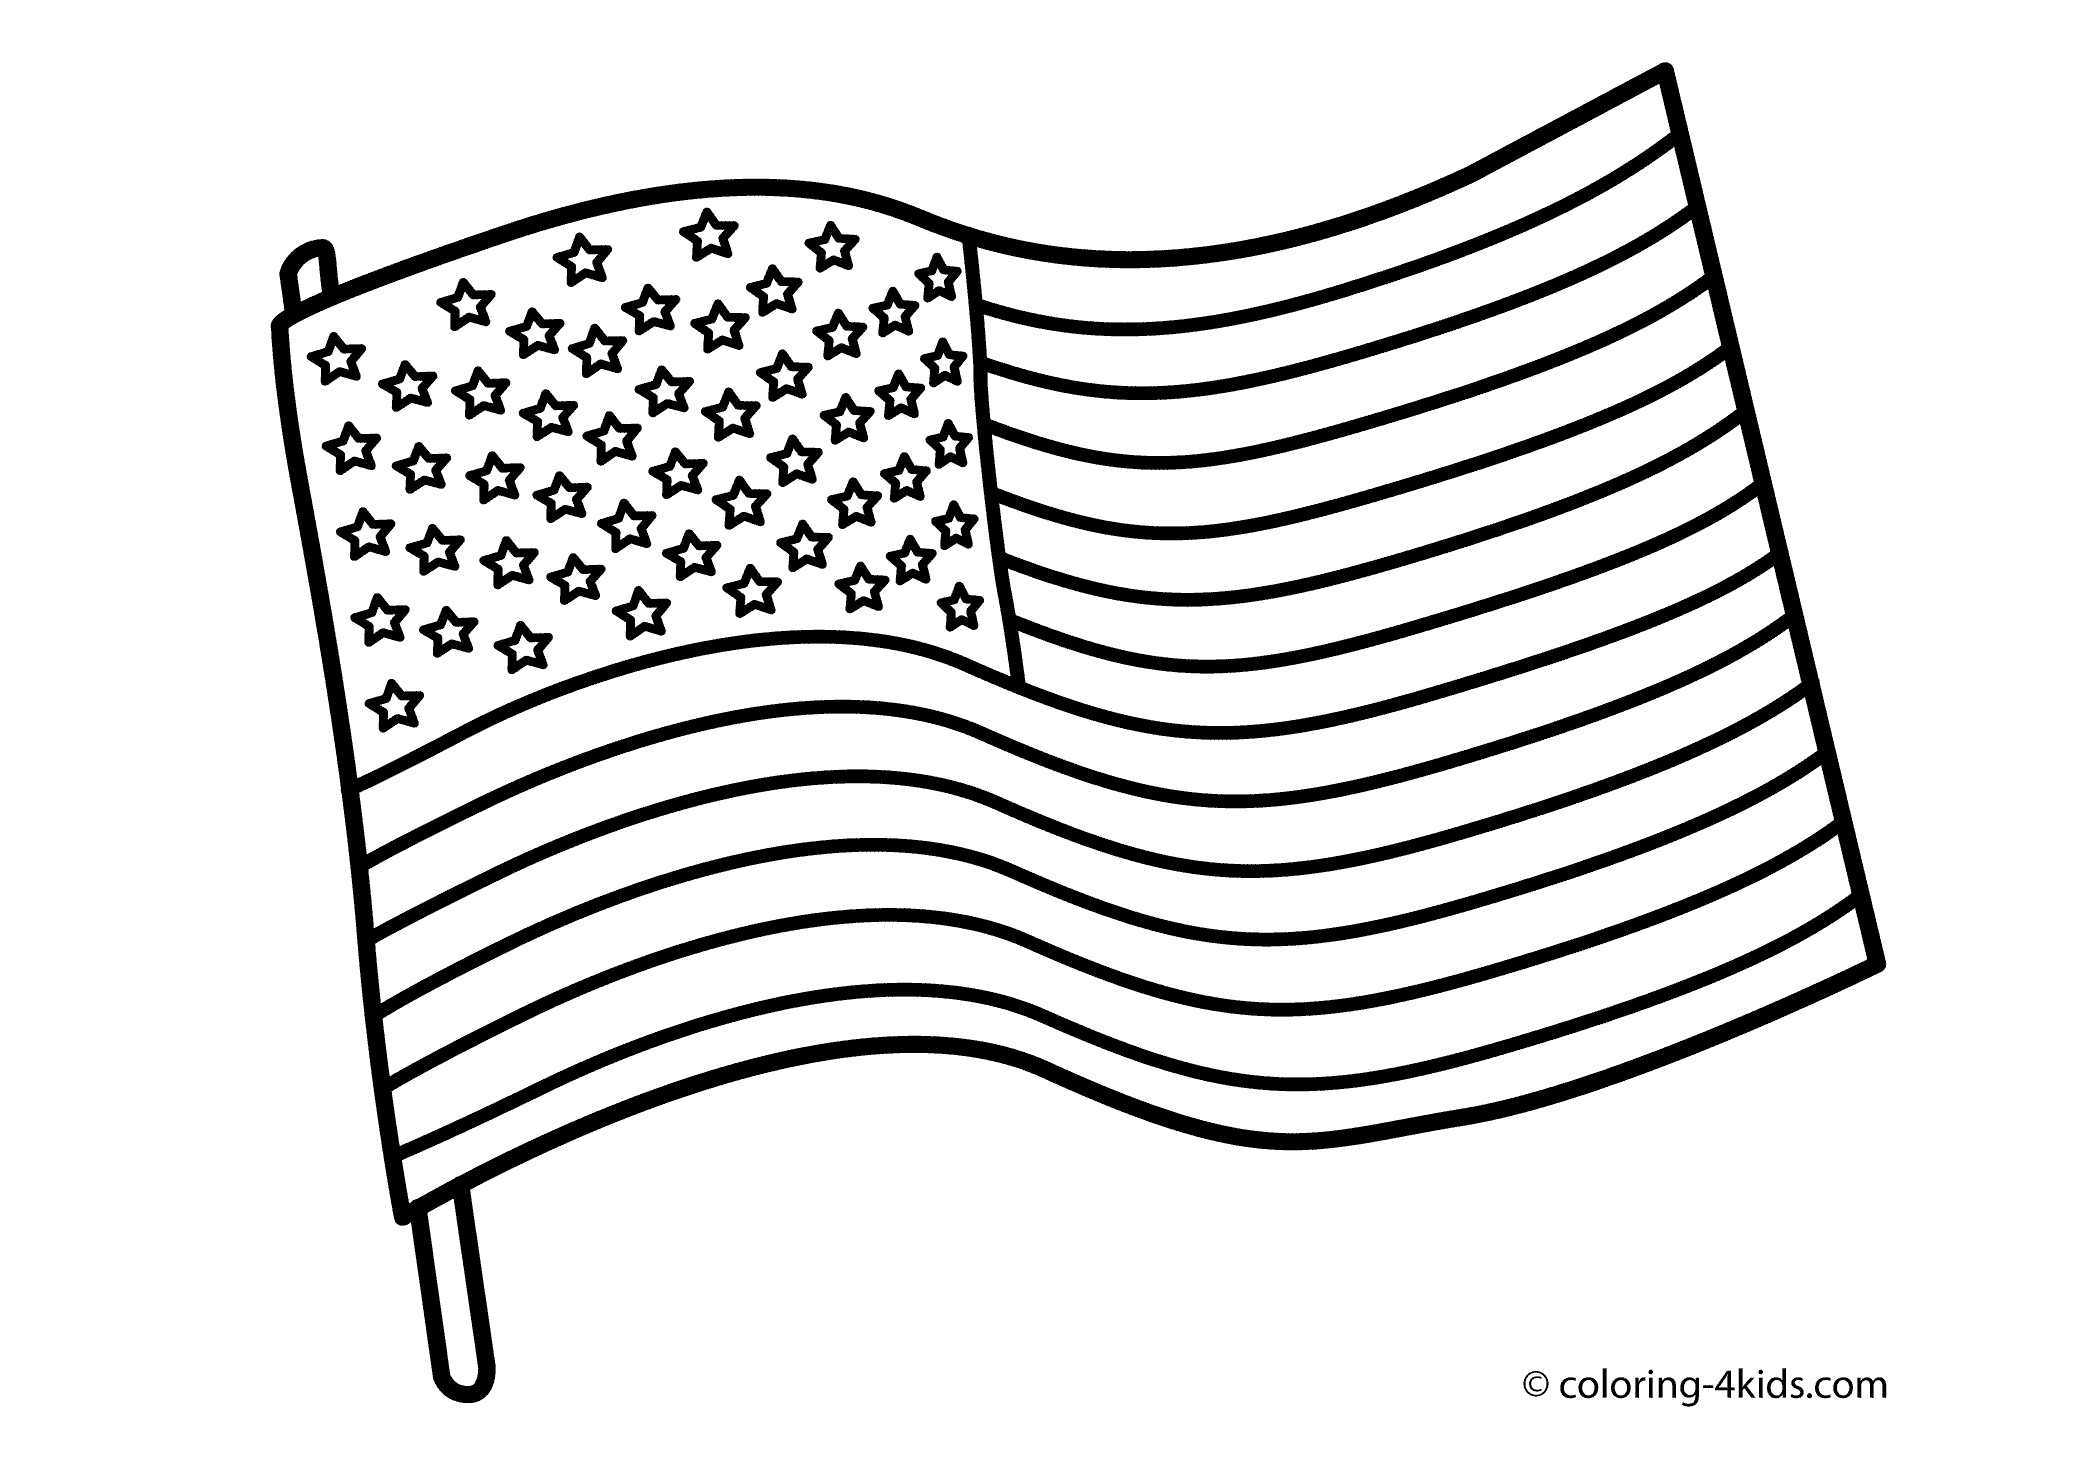 Coloring Ideas : Flag Coloring Pages To Download And Print For Free - Free Printable American Flag Coloring Page